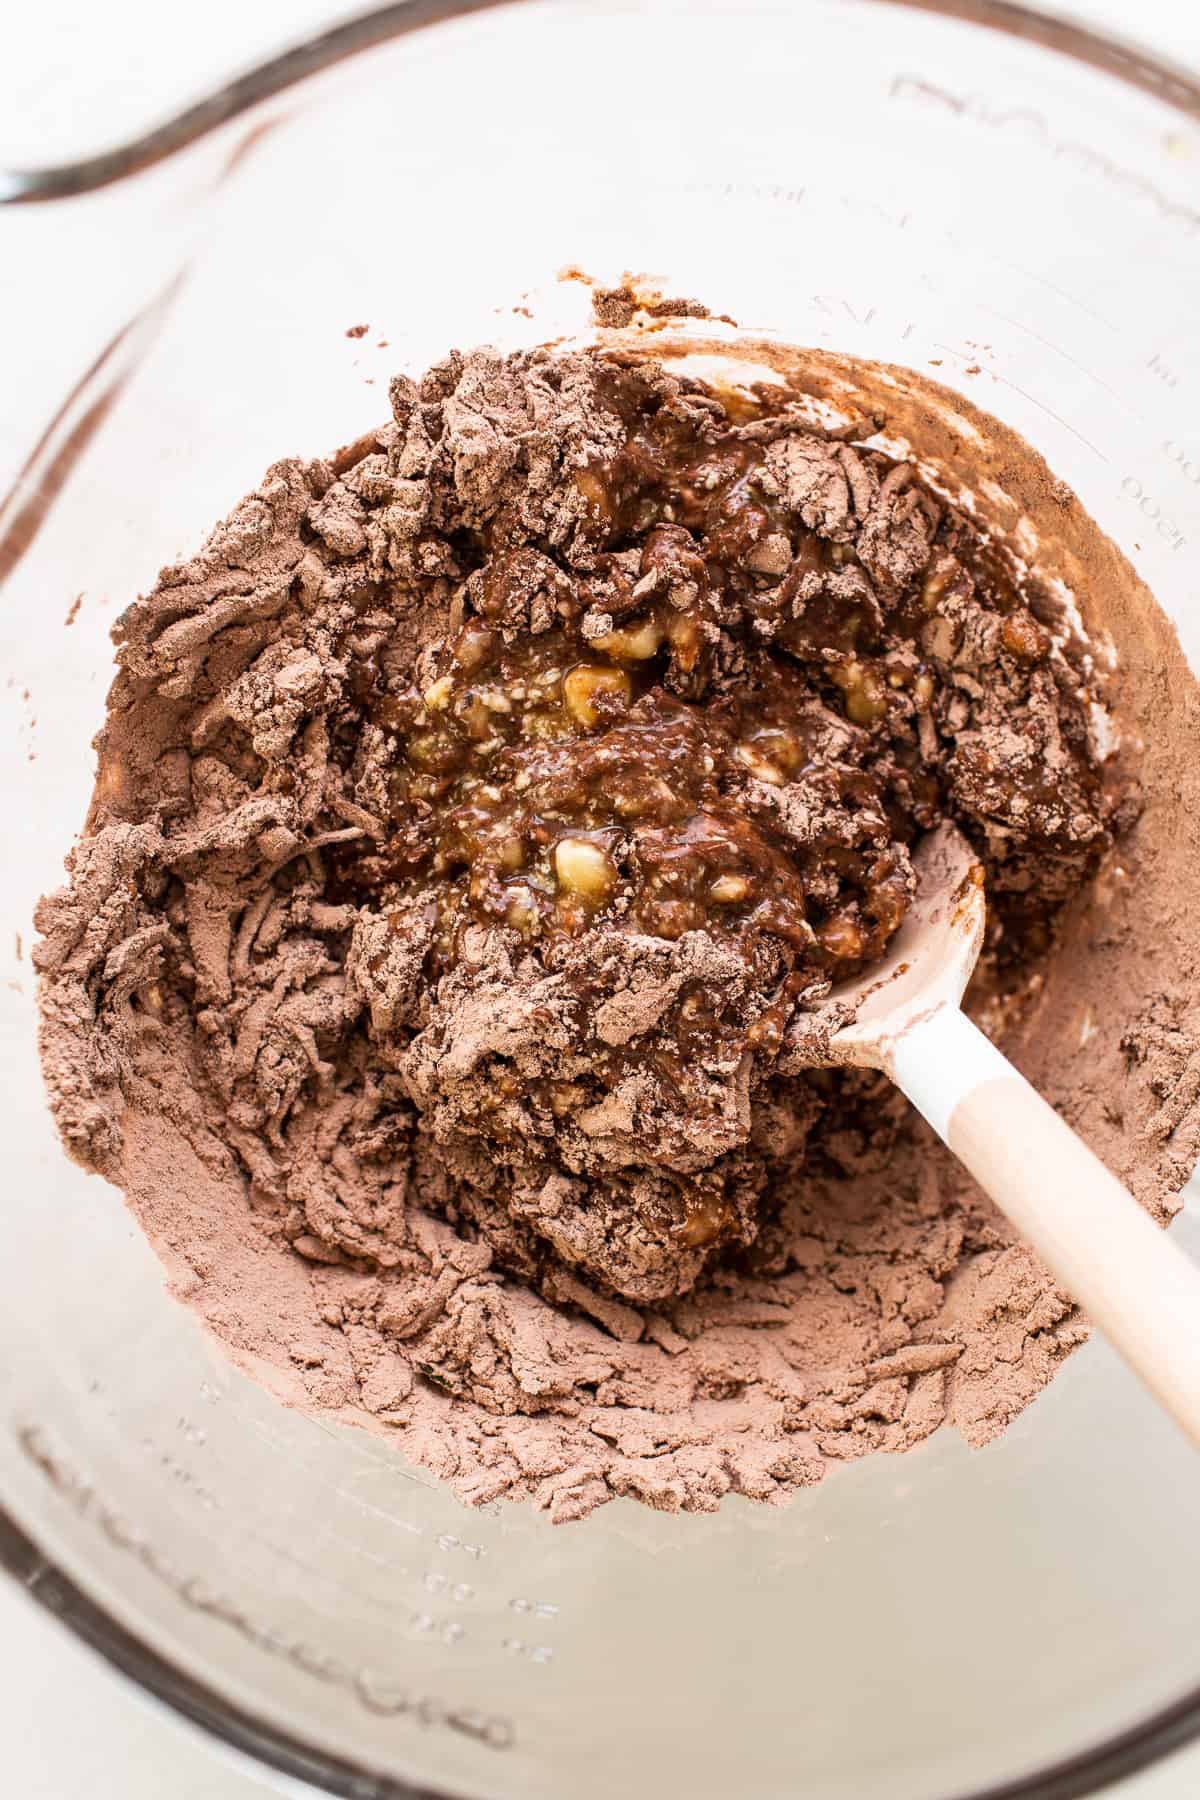 Dry and wet ingredients combined in a bowl for chocolate zucchini bread.